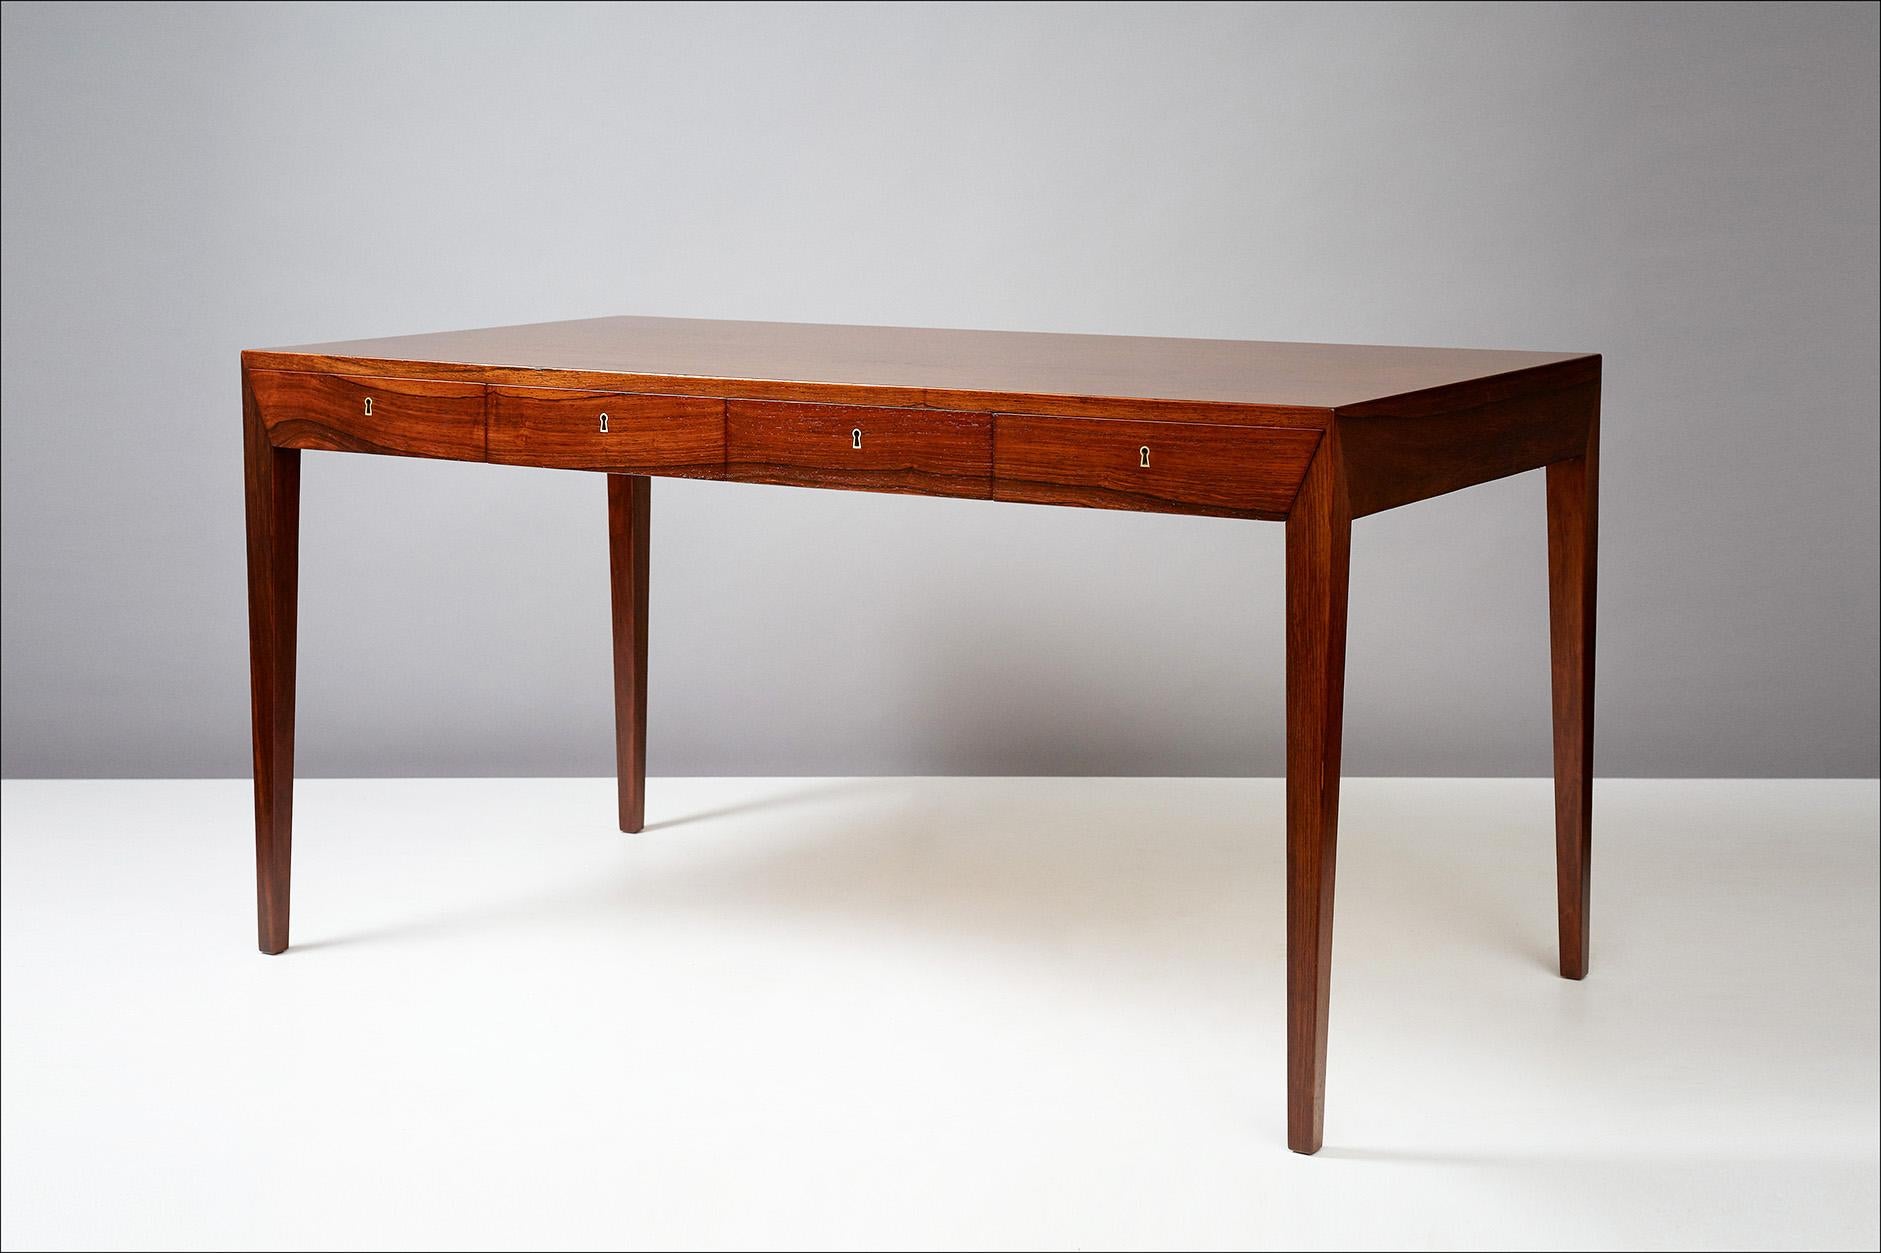 Severin Hansen Jnr.

Writing desk, circa 1950s.

Produced by Haslev Mobelsnedkeri, Denmark. Rosewood veneer construction and brass fittings with 4 integral drawers. Original keys are included. The item has been professionally restored by our